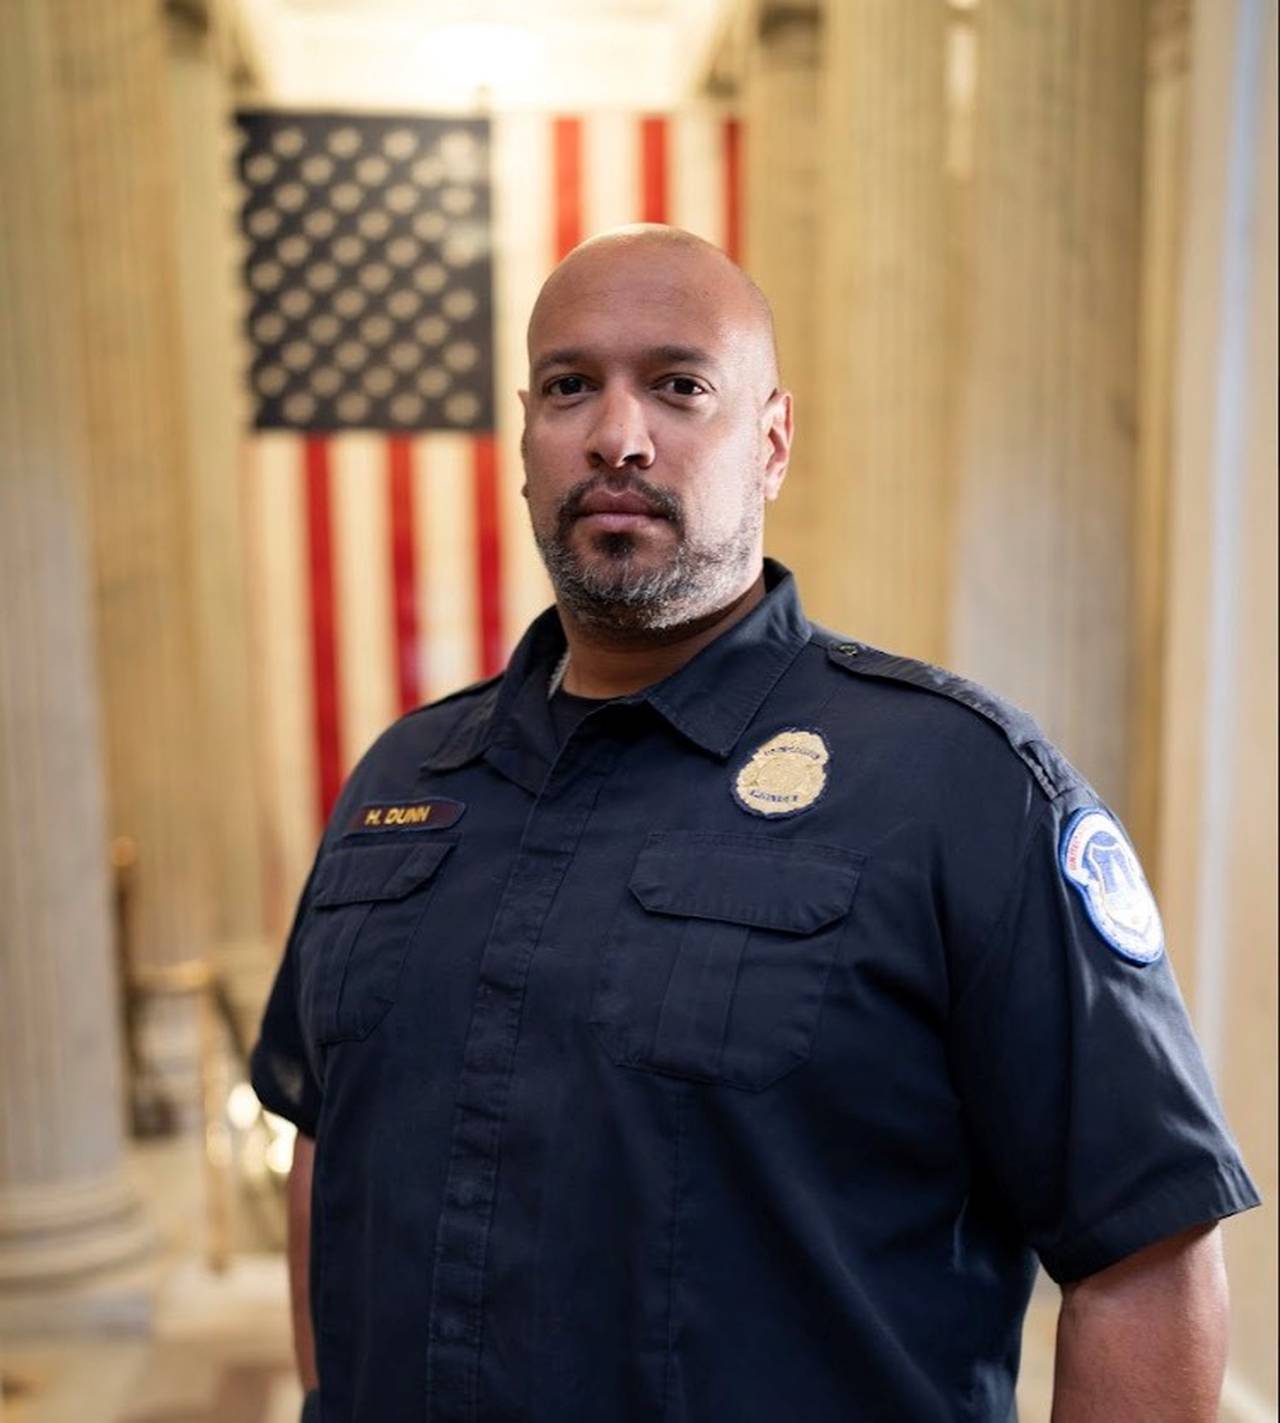 Harry Dunn, a former U.S. Capitol Police officer who defended the Capitol as it was overrun by a mob on Jan. 6, 2021, is running for Congress in Maryland's 3rd Congressional District.